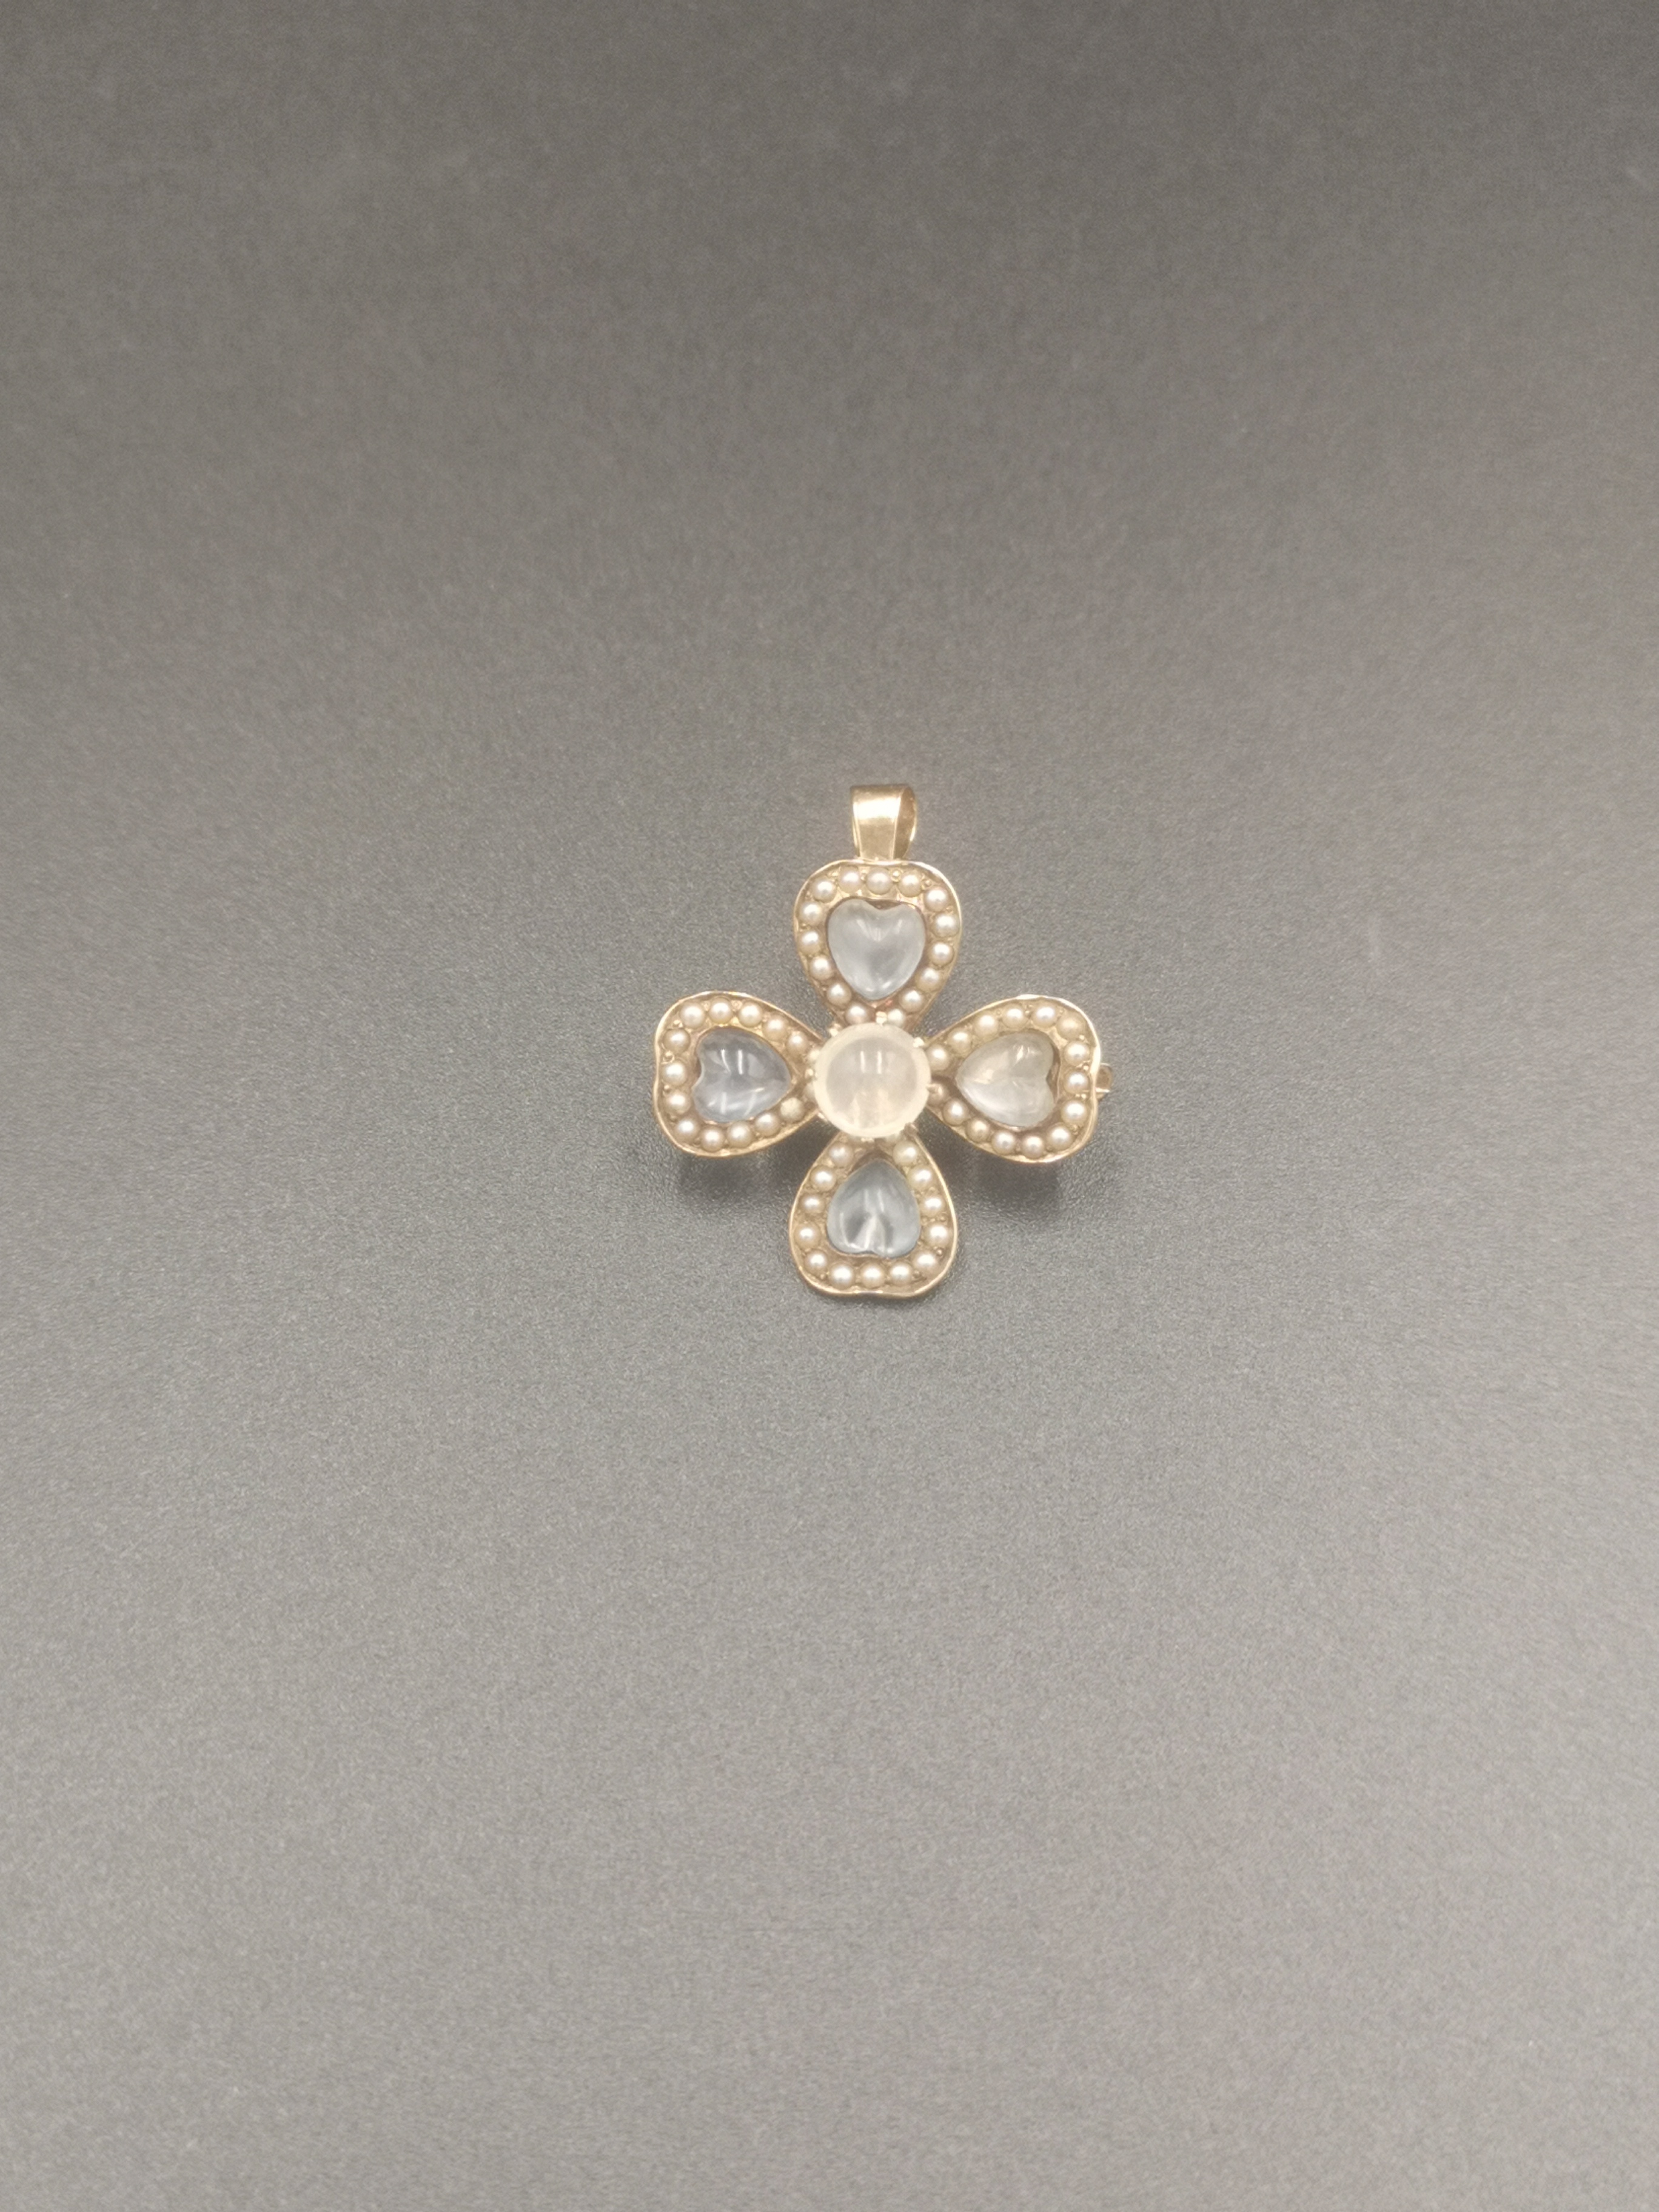 Gold flower pendant set with moonstone - Image 6 of 6